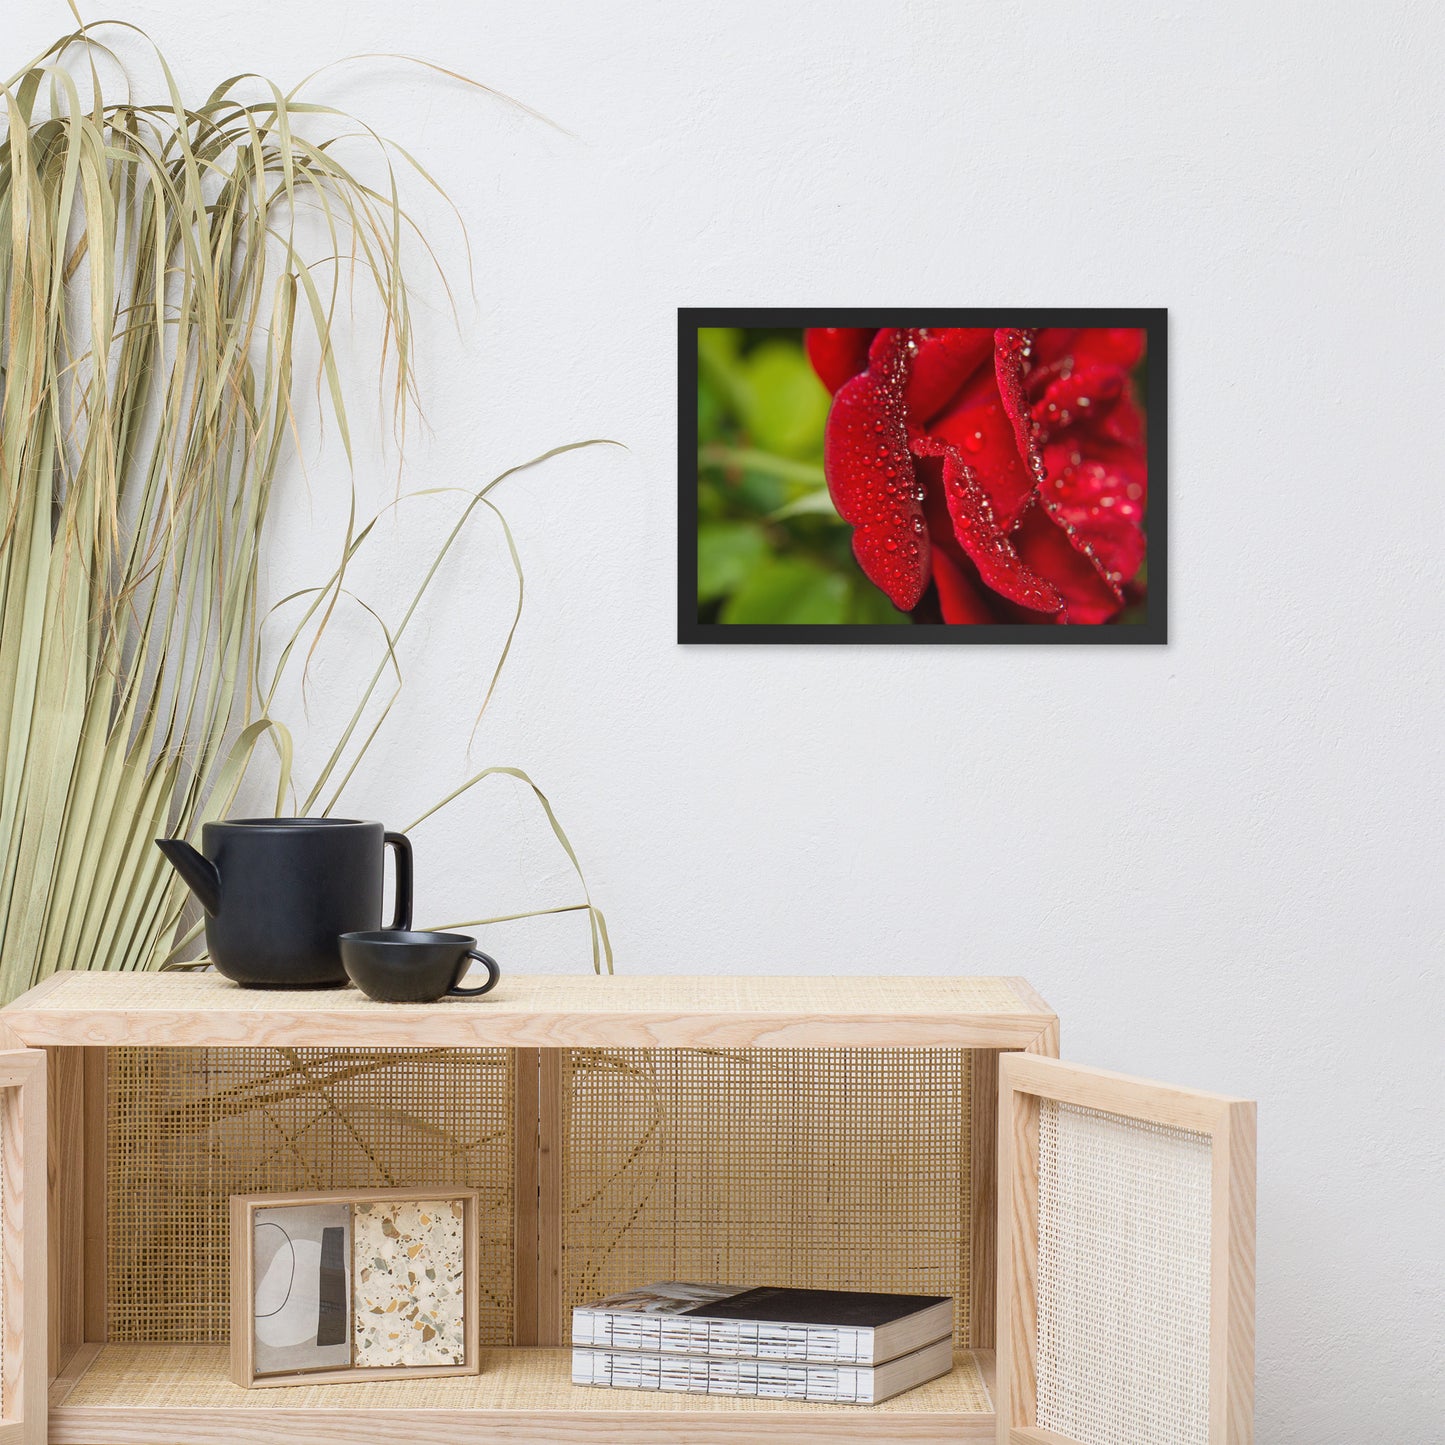 Bold and Beautiful Floral Nature Photo Framed Wall Art Print